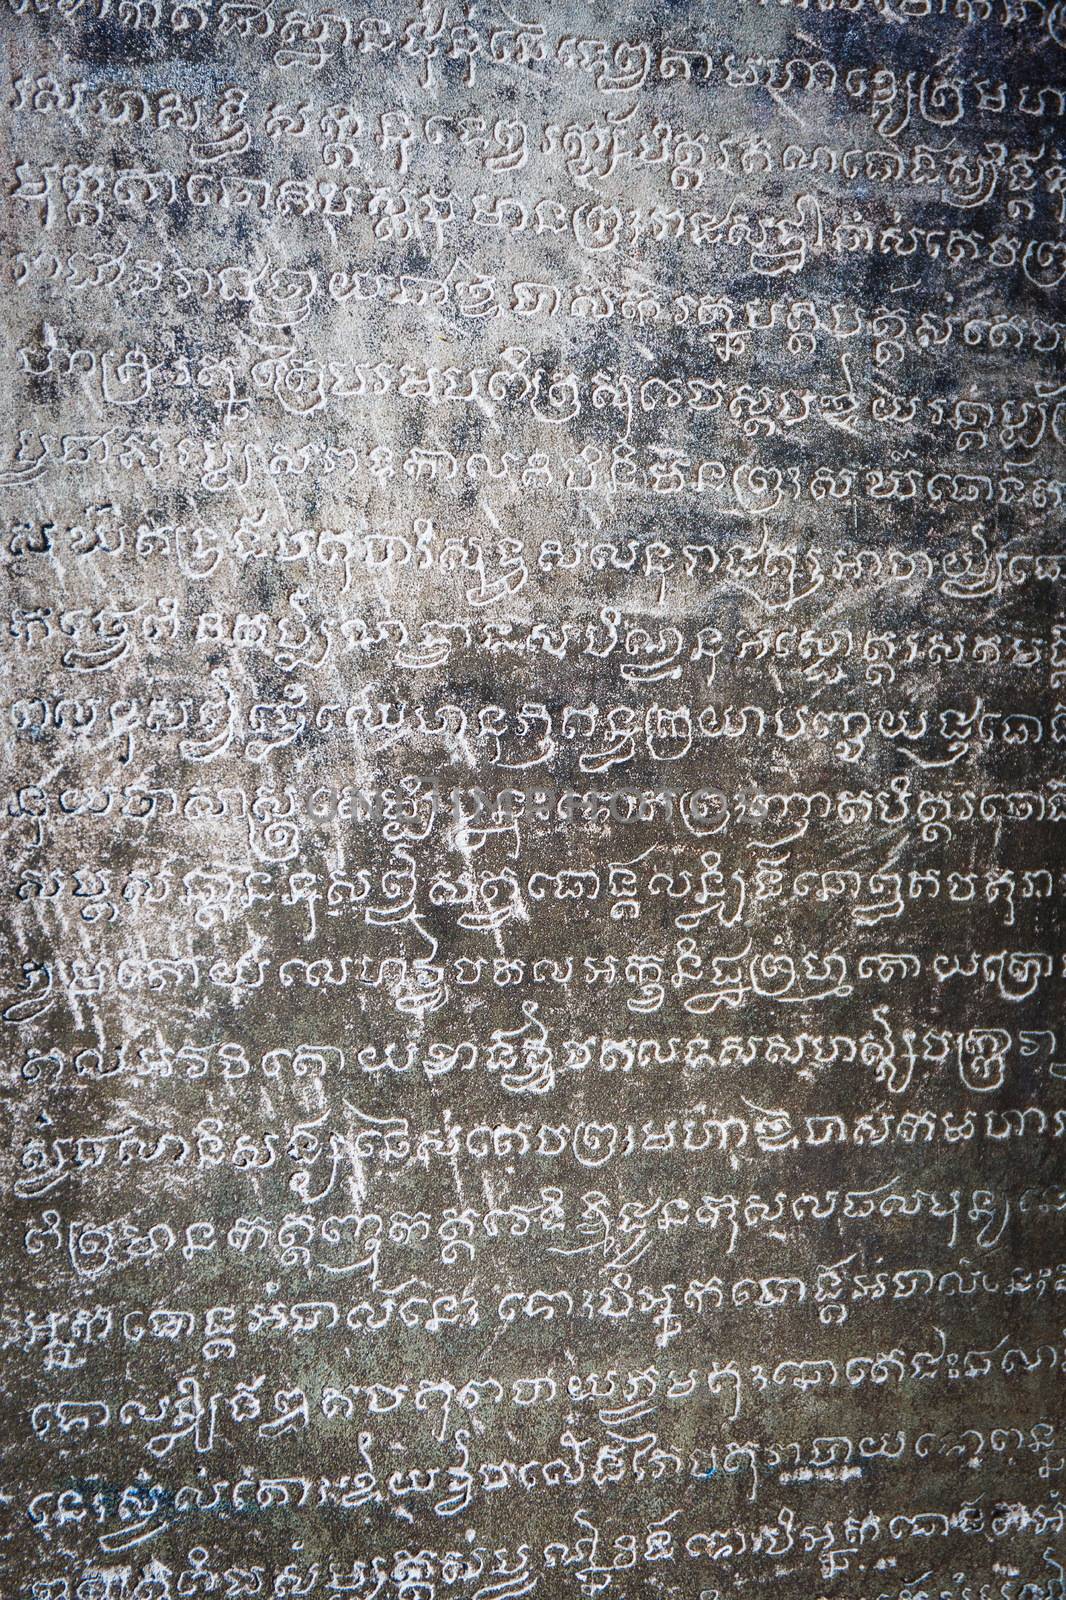 Khmer writing on the wall  by gorov108